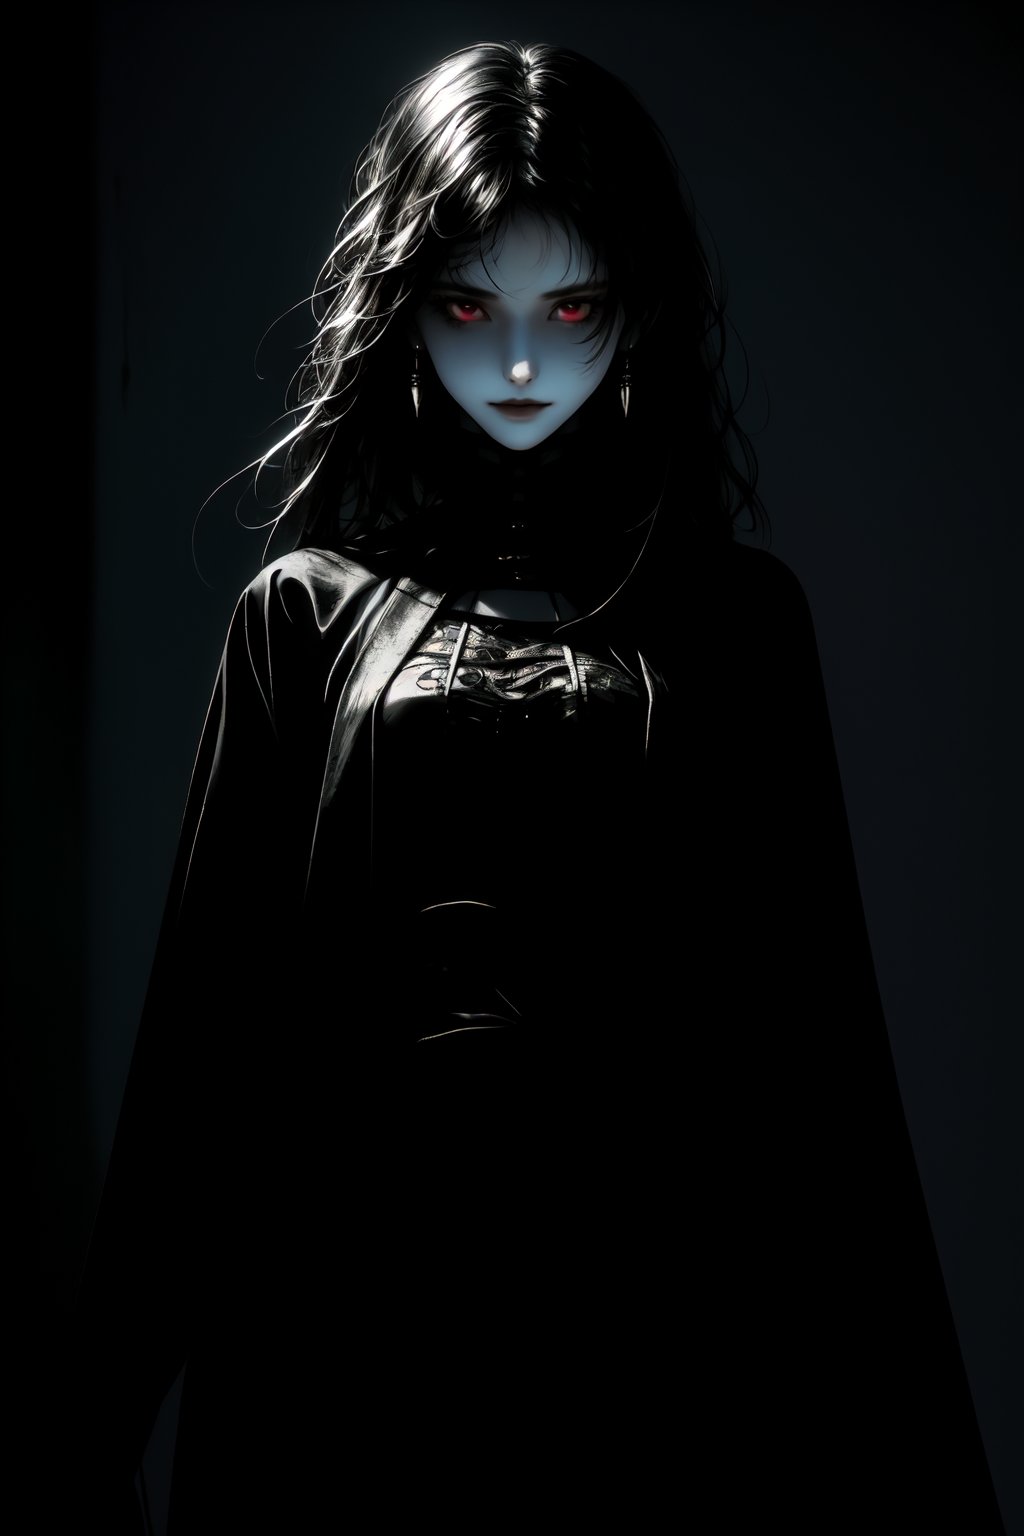 A melancholic portrait of a beautiful woman, clad in all-encompassing black attire, stands stoic amidst a somber, mysterious backdrop. Shadows dance across her pale complexion as she smiles menacingly at the viewer, the foreboding lighting accentuating the severity of her expression. The atmosphere is heavy with foreboding, as if secrets lurk in the darkness.